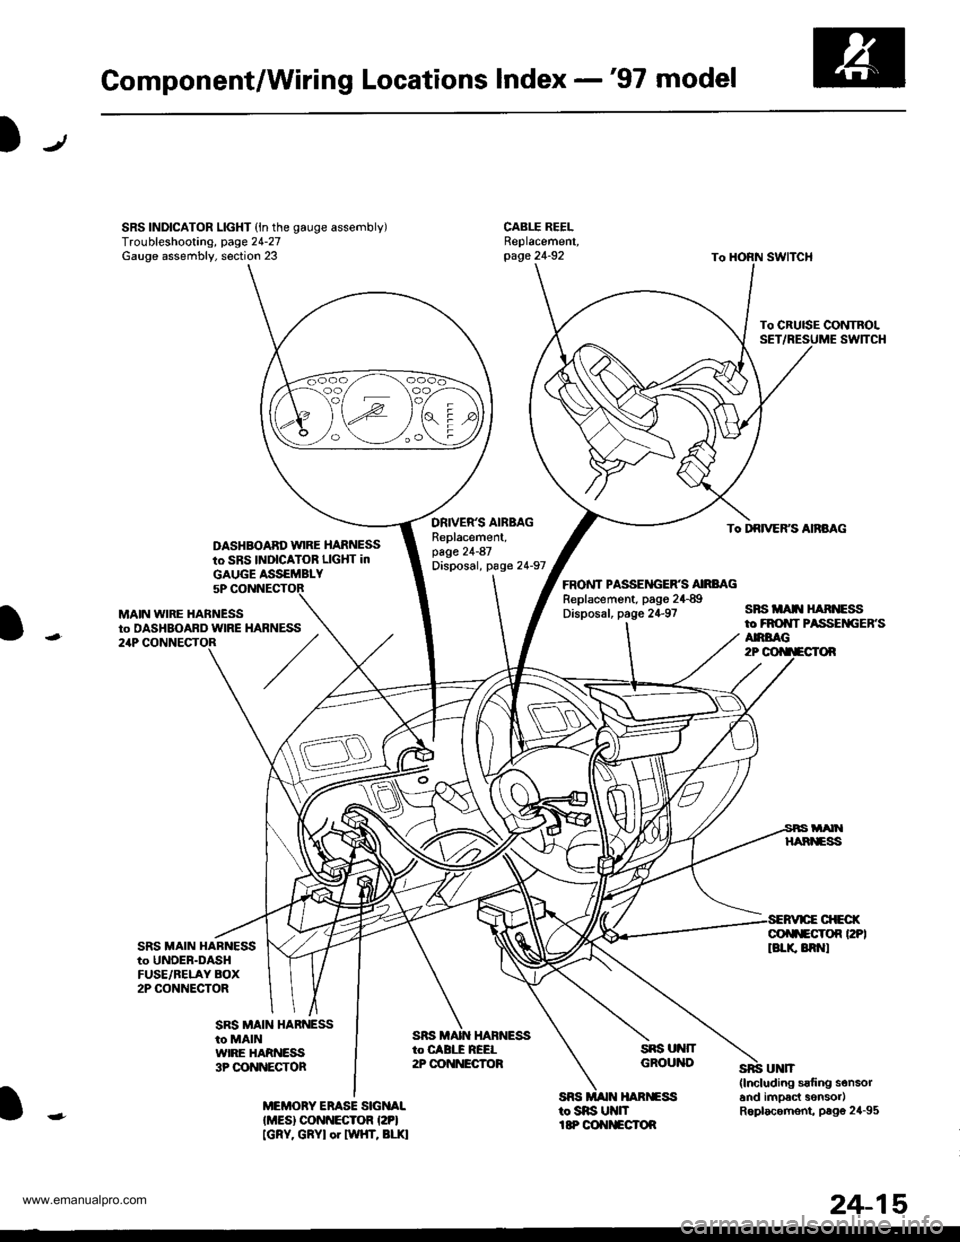 HONDA CR-V 1998 RD1-RD3 / 1.G Workshop Manual 
Component/Wiring Locations Index -97 model
SRS INDICATOR LIGHT (ln the gauge assembly)Troubleshooting, page 24-27Gauge assembly, section 23
DASHBOABD w|RE HARNESS
to SBS INDICATOR LIGHT in
DRIVERS 